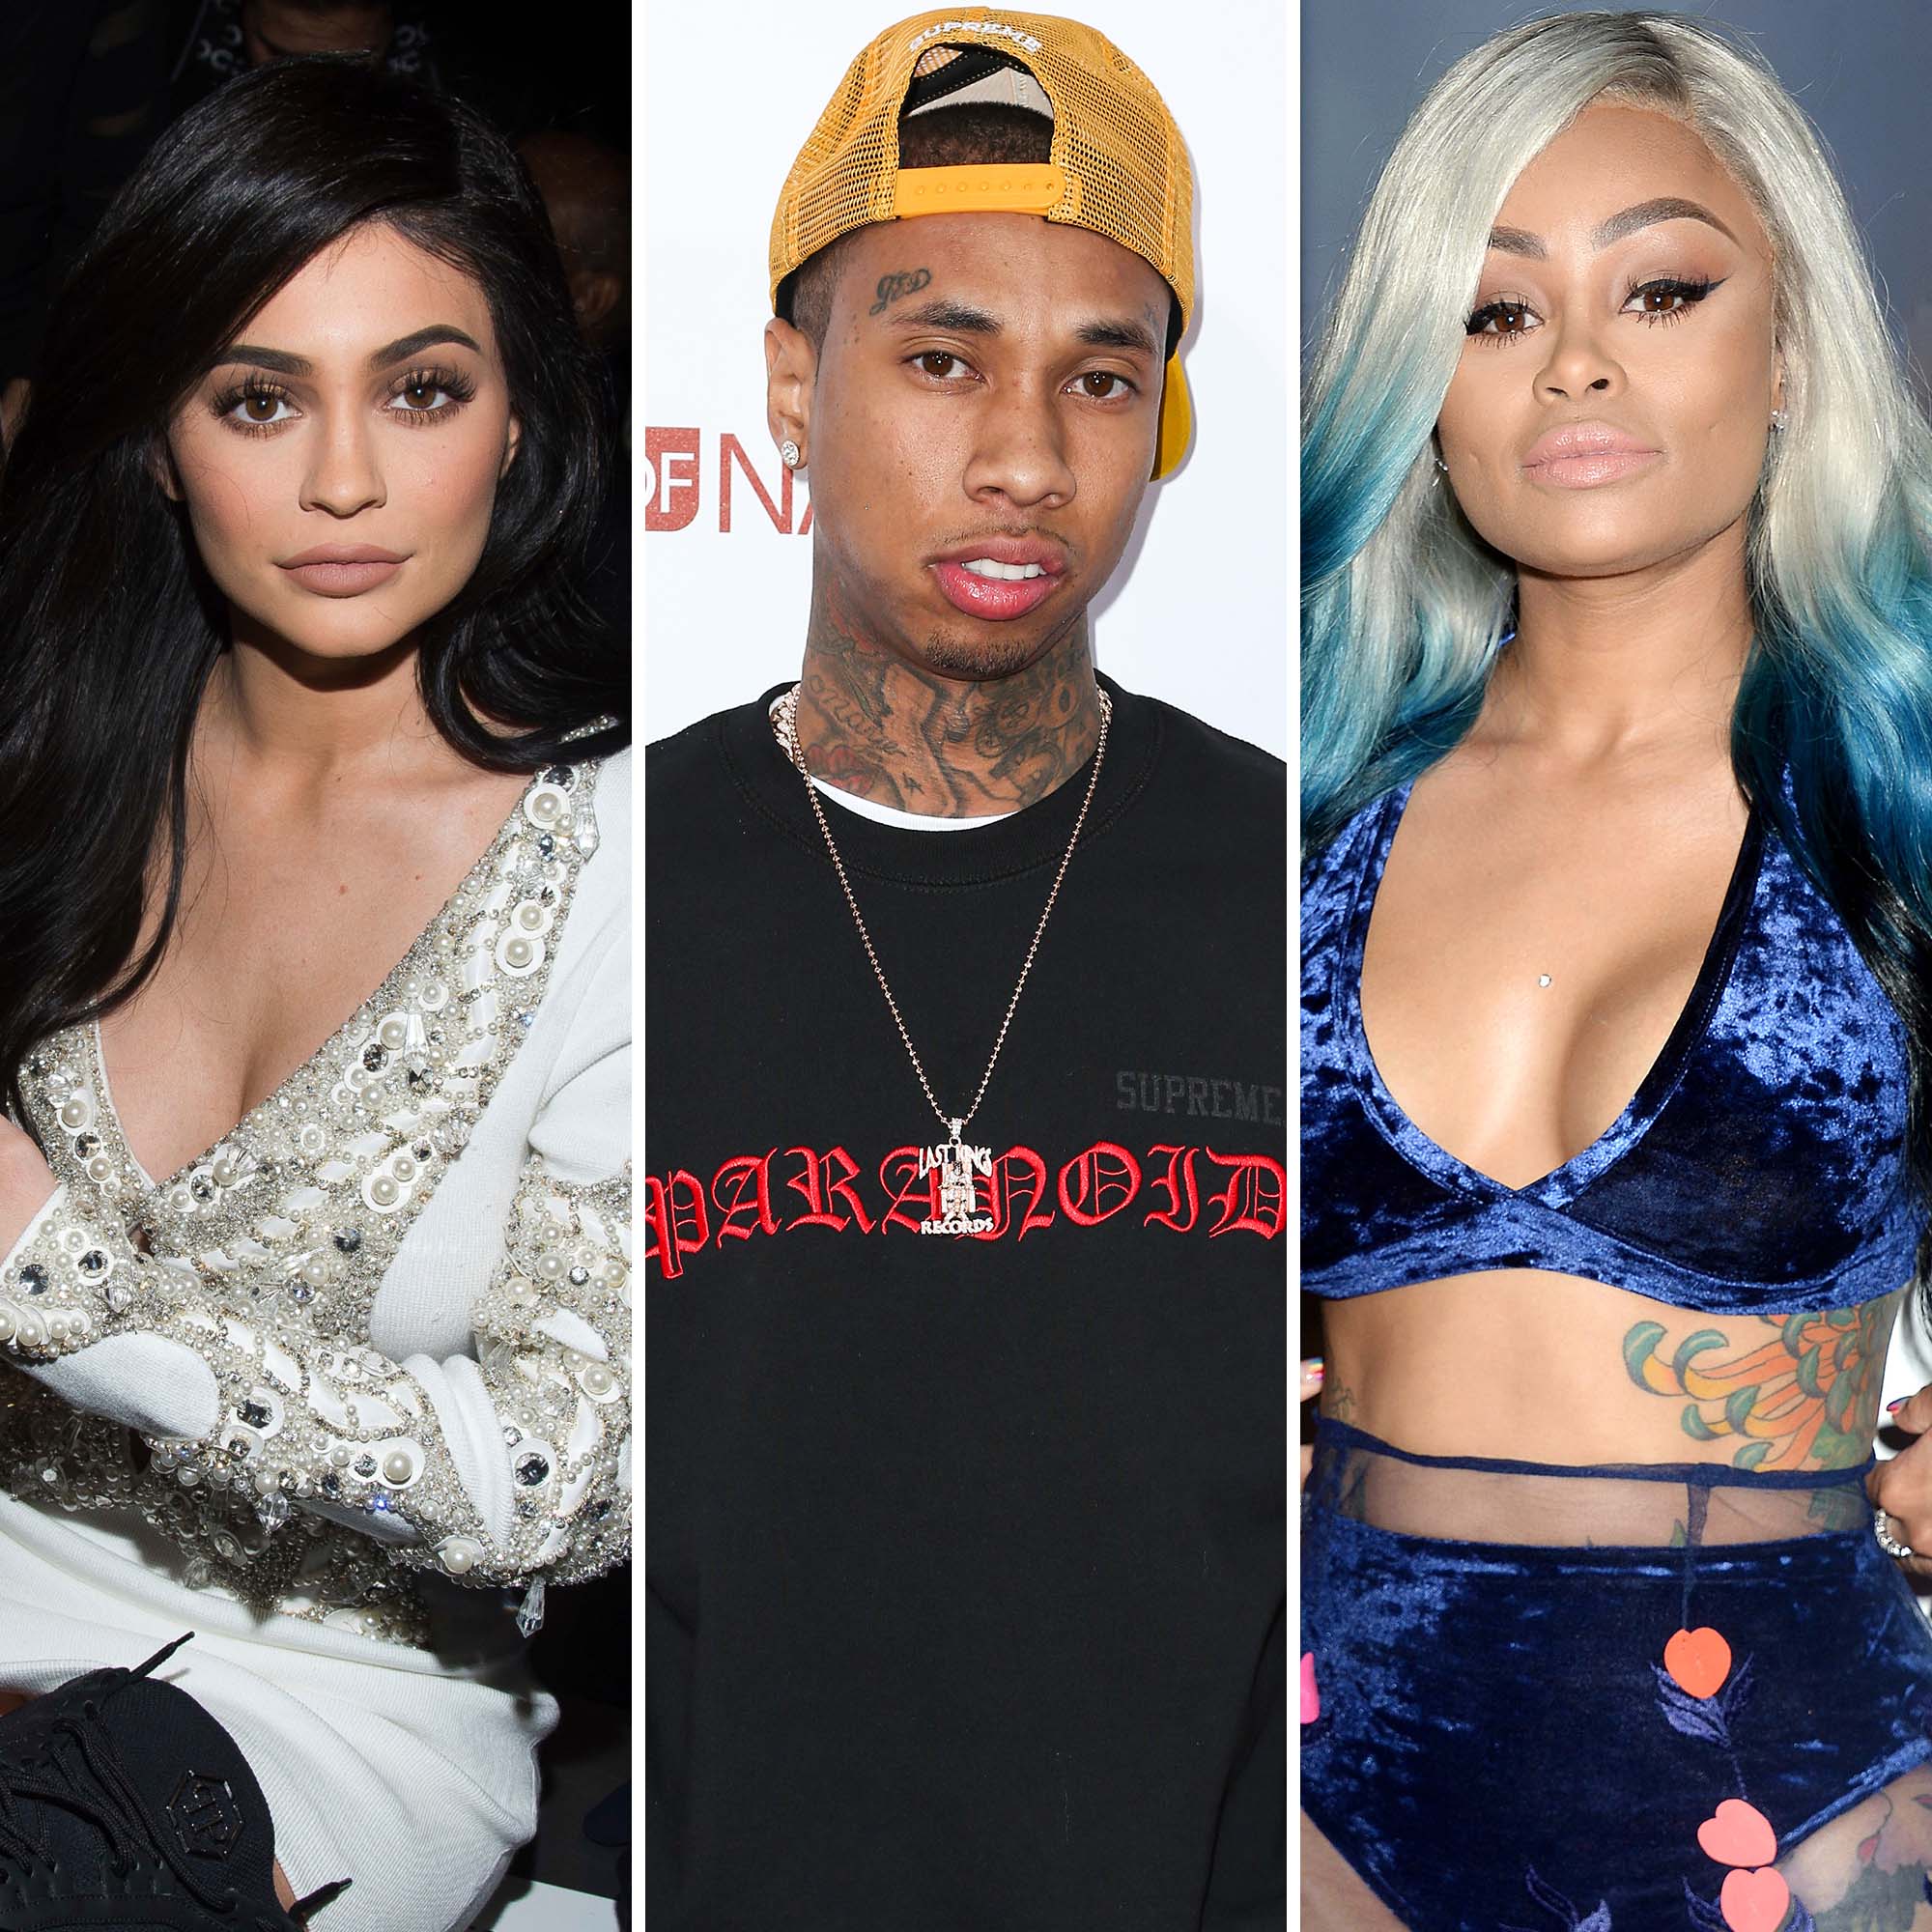 Leila Chyna - Kylie Jenner: Tyga Accused Blac Chyna of Attacking Him With Knife